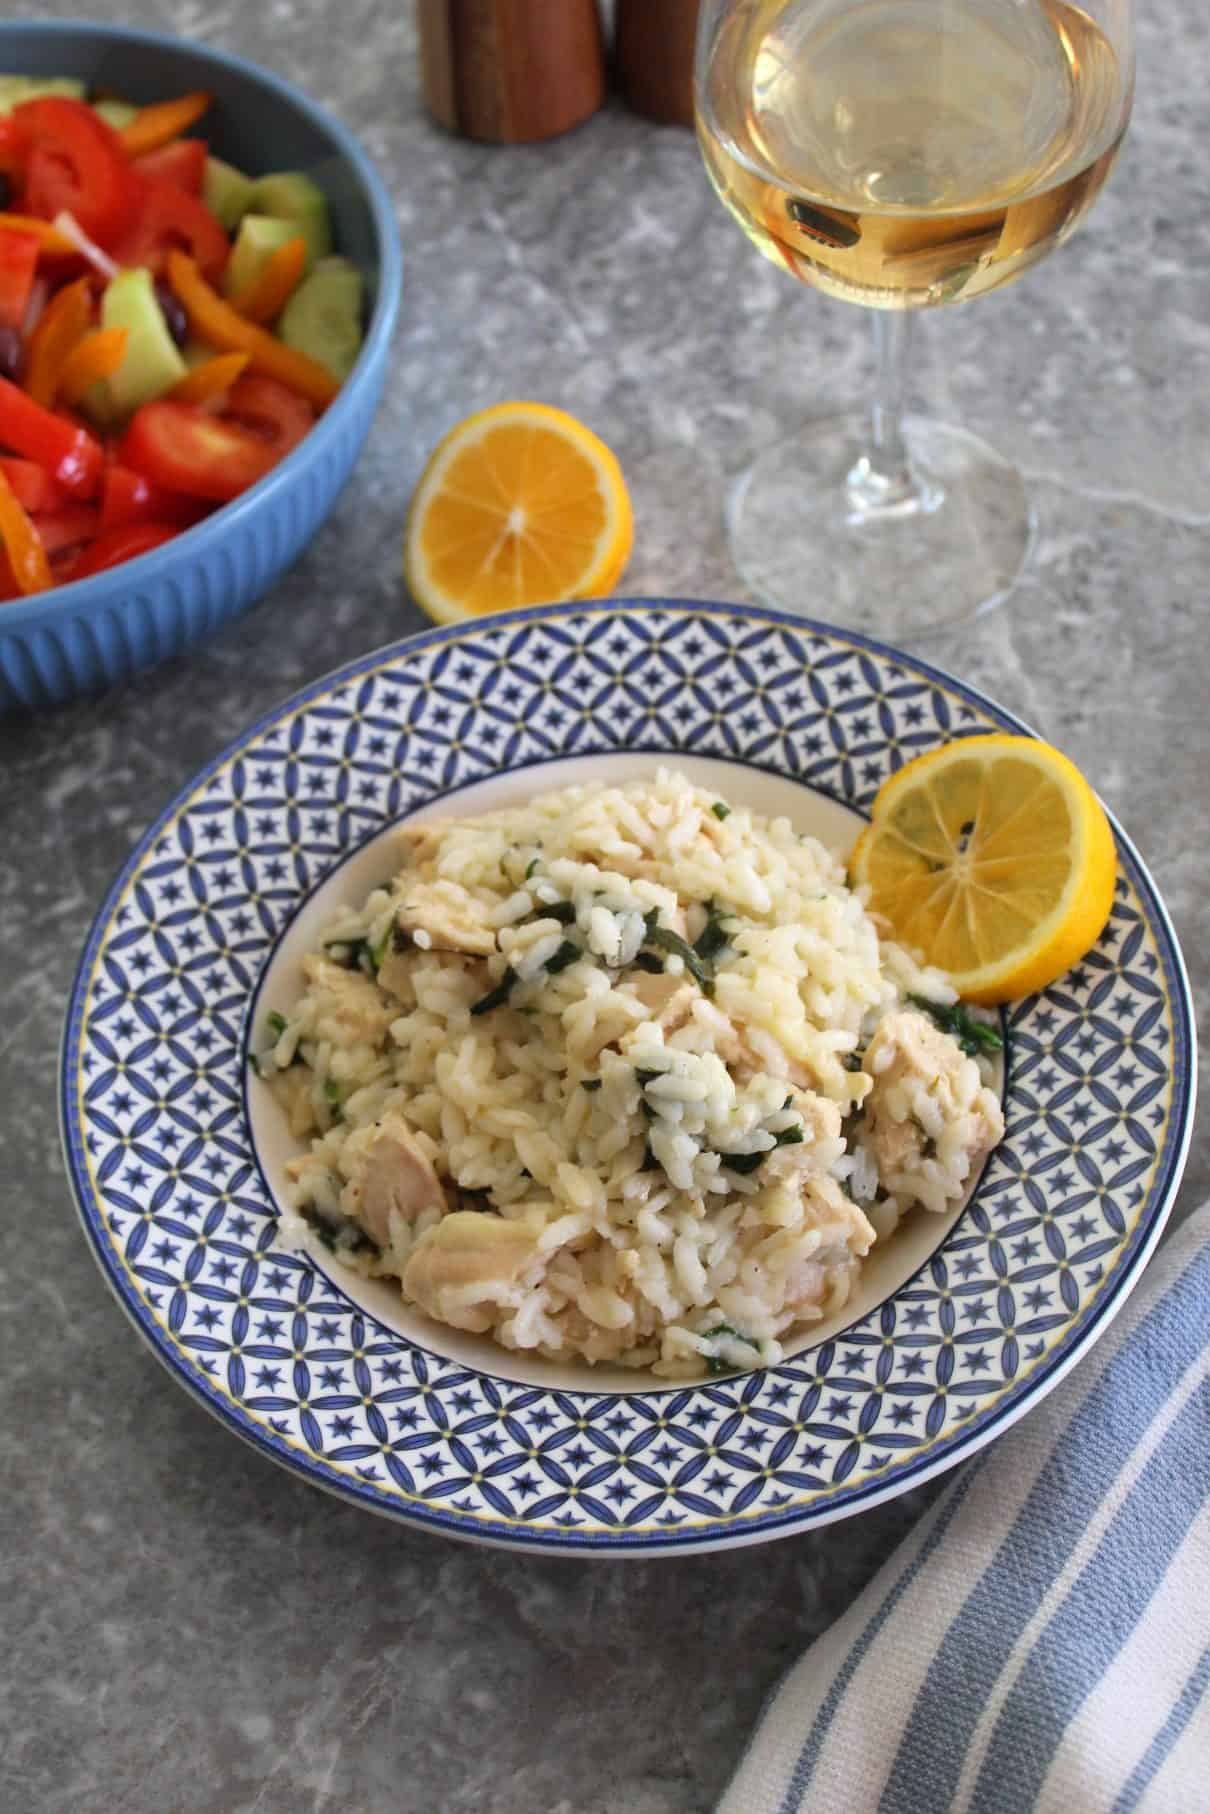 A plate of risotto garnished with lemon. Risotto seems to have chicken and spinach in it. Out of focus you see a salad bowl, a half lemon and a glass of rose wine.